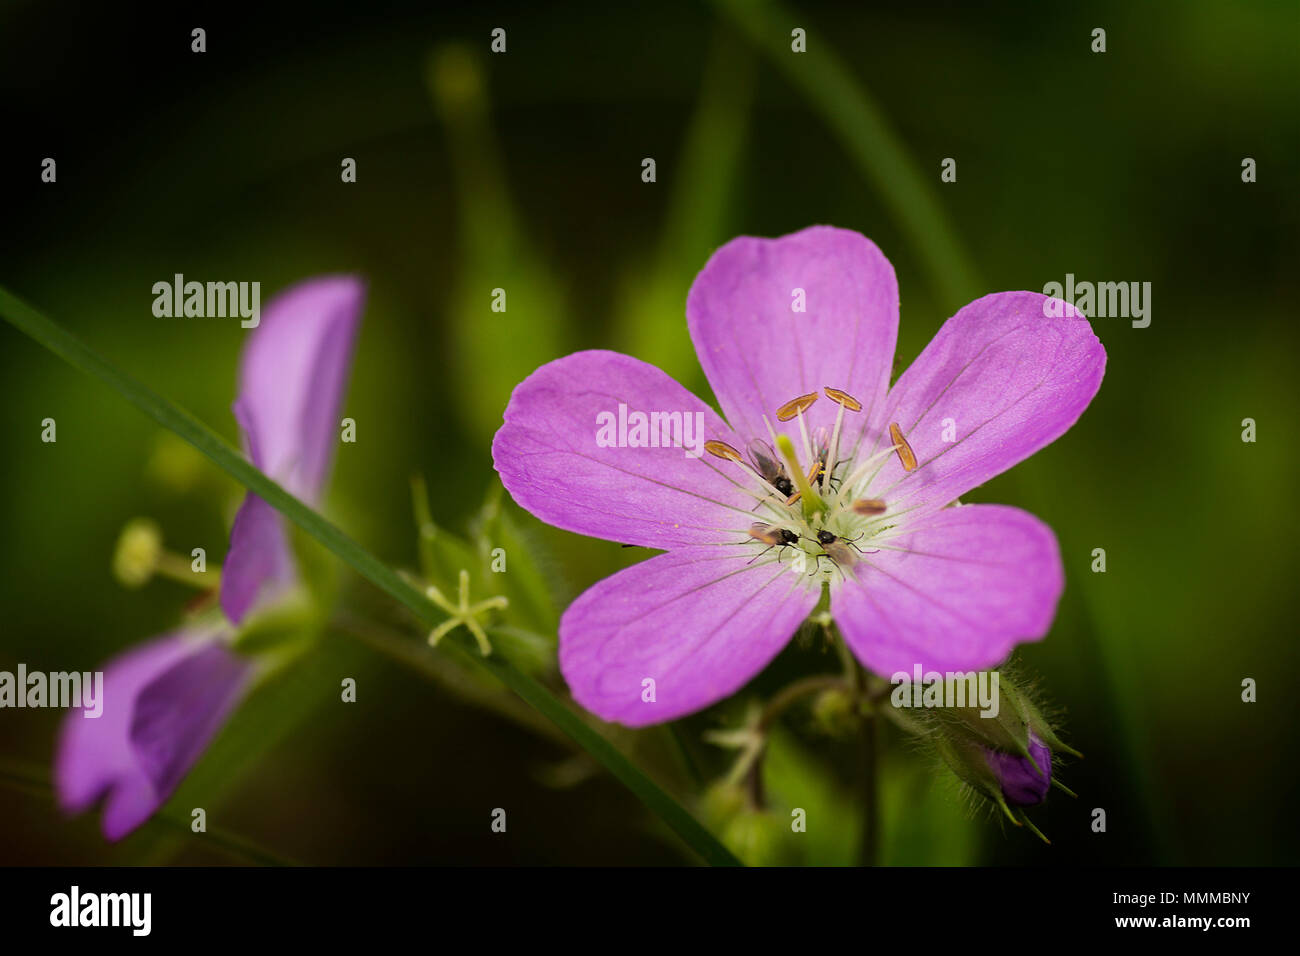 Close-up of a Wild Geranium or Geranium maculatum wildflower with small insects on it. Stock Photo